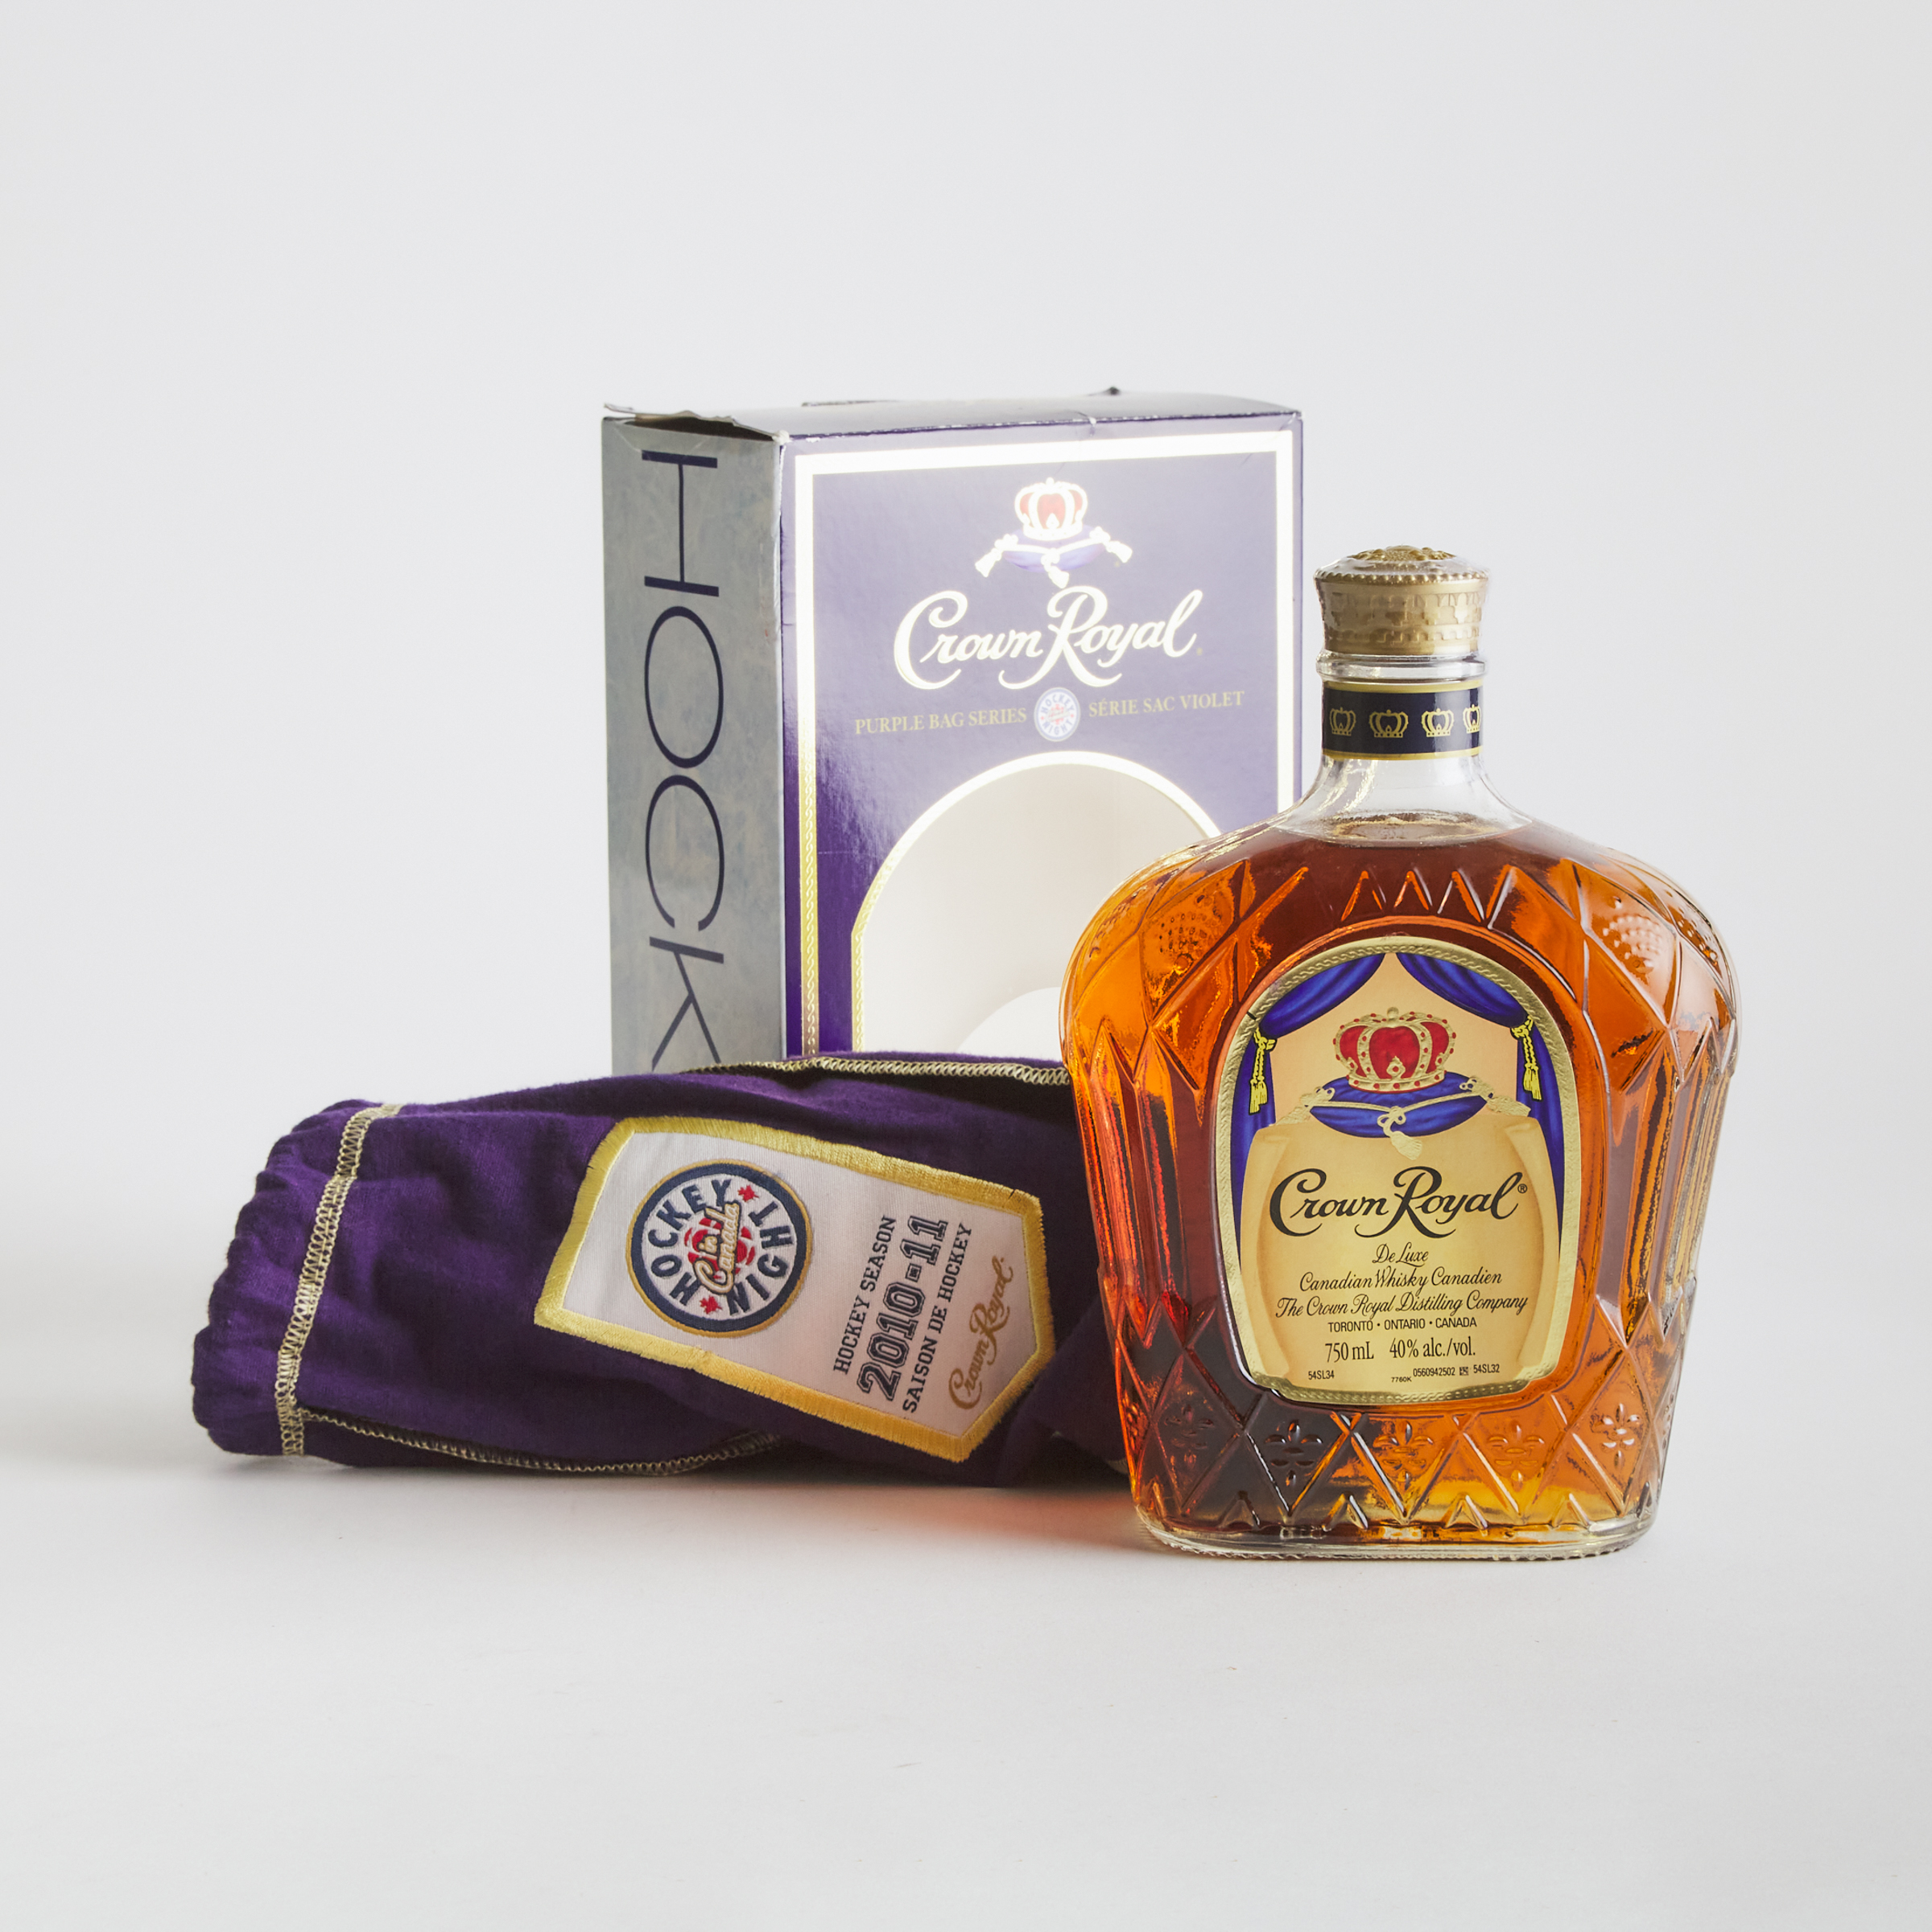 CROWN ROYAL DE LUXE CANADIAN WHISKY (ONE 750 ML)